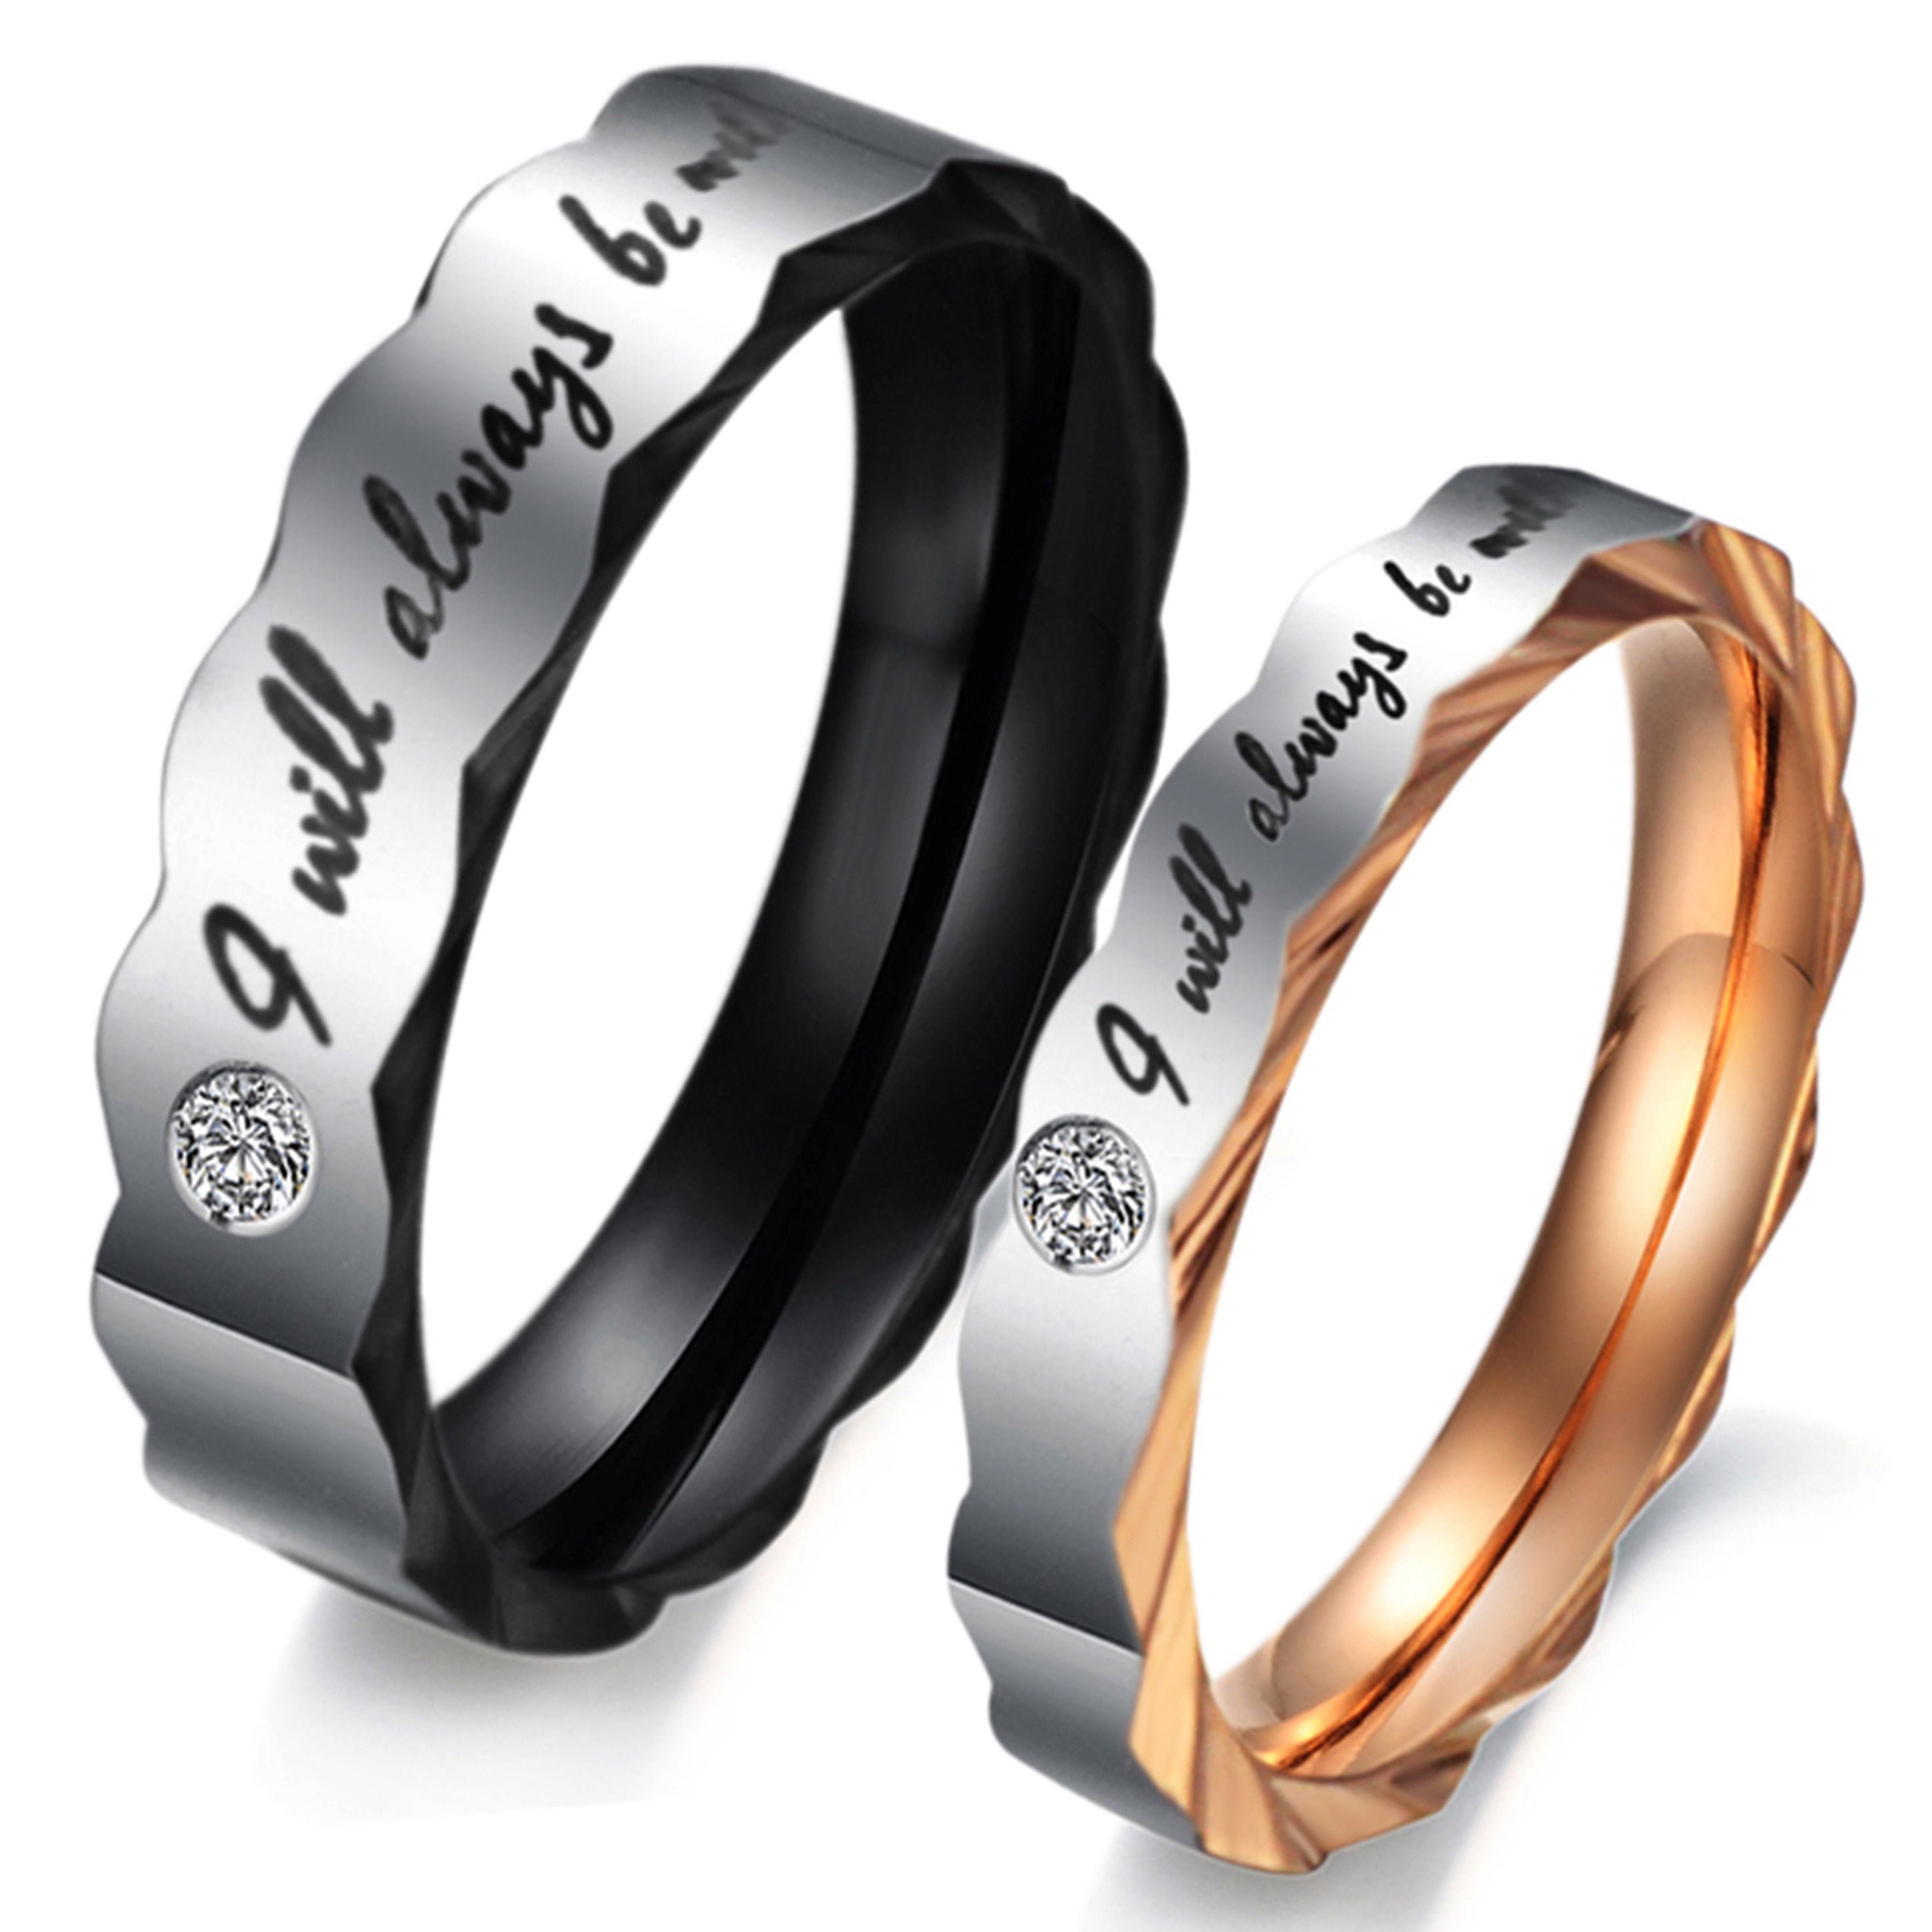 Stainless Steel YOU ARE PERFECT IN MY MIND Men's Women's Couple Rings Wedding 